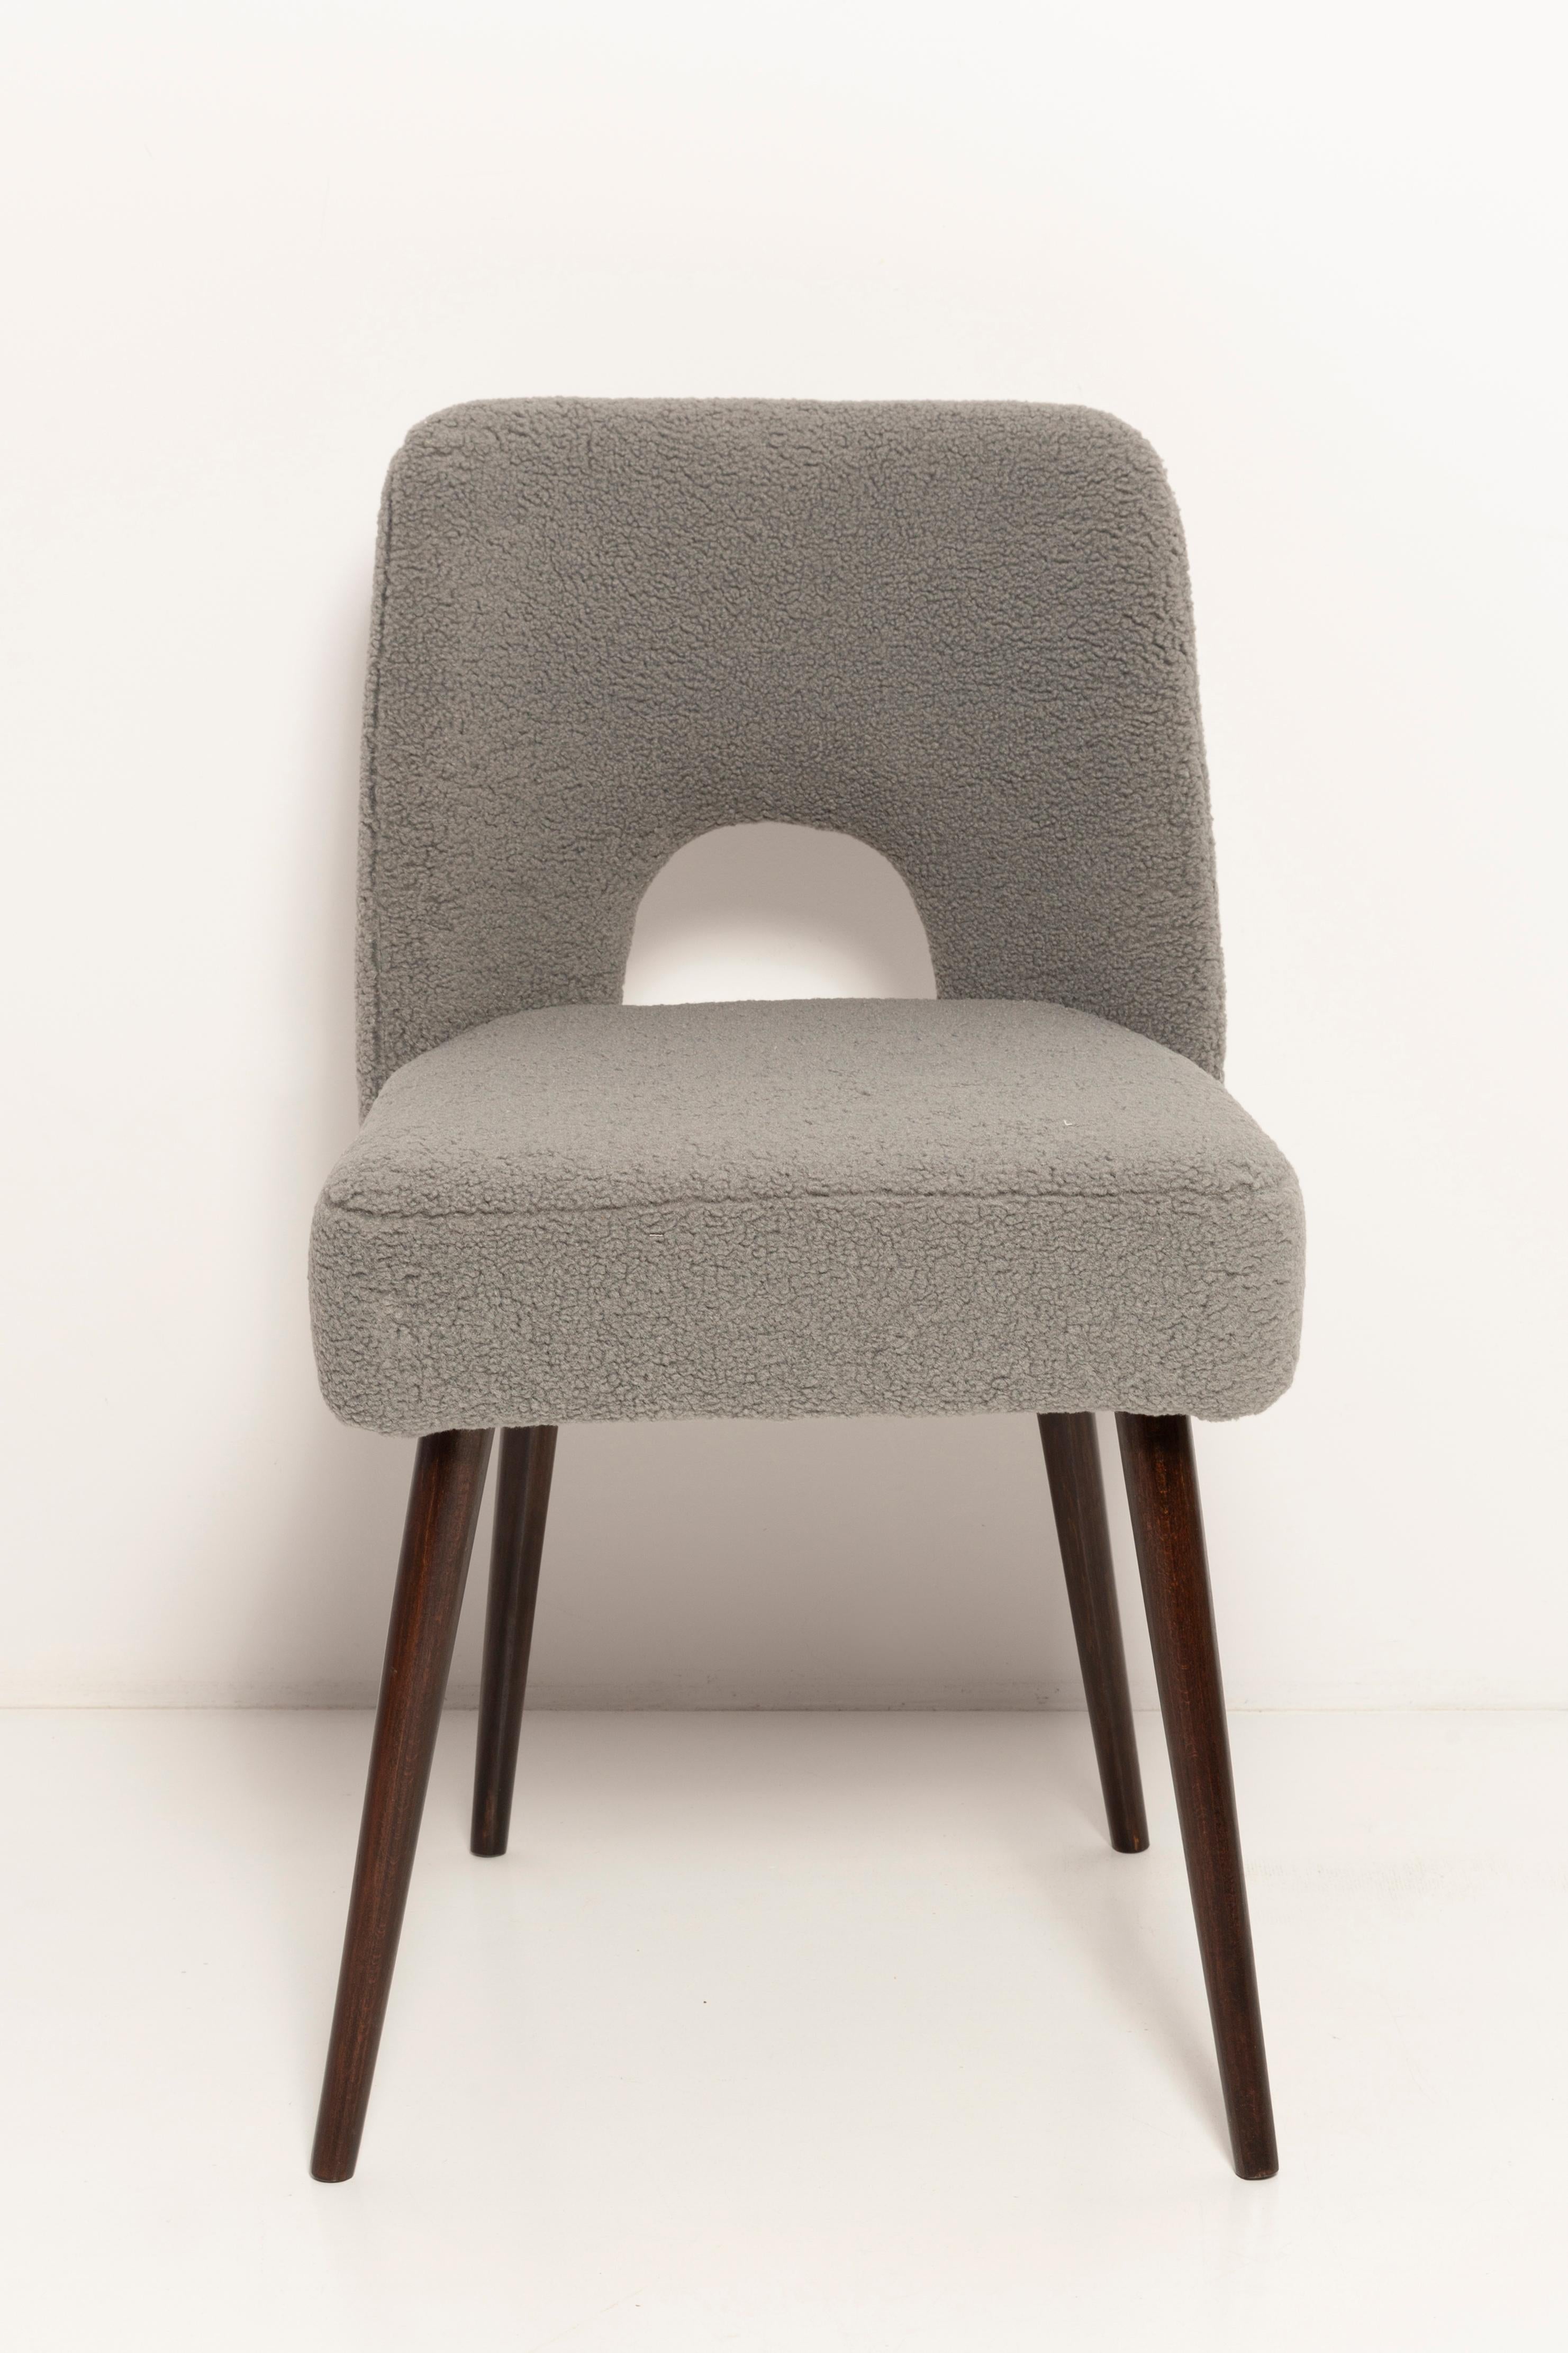 Gray Boucle 'Shell' Chair, Europe, 1960s In Excellent Condition For Sale In 05-080 Hornowek, PL